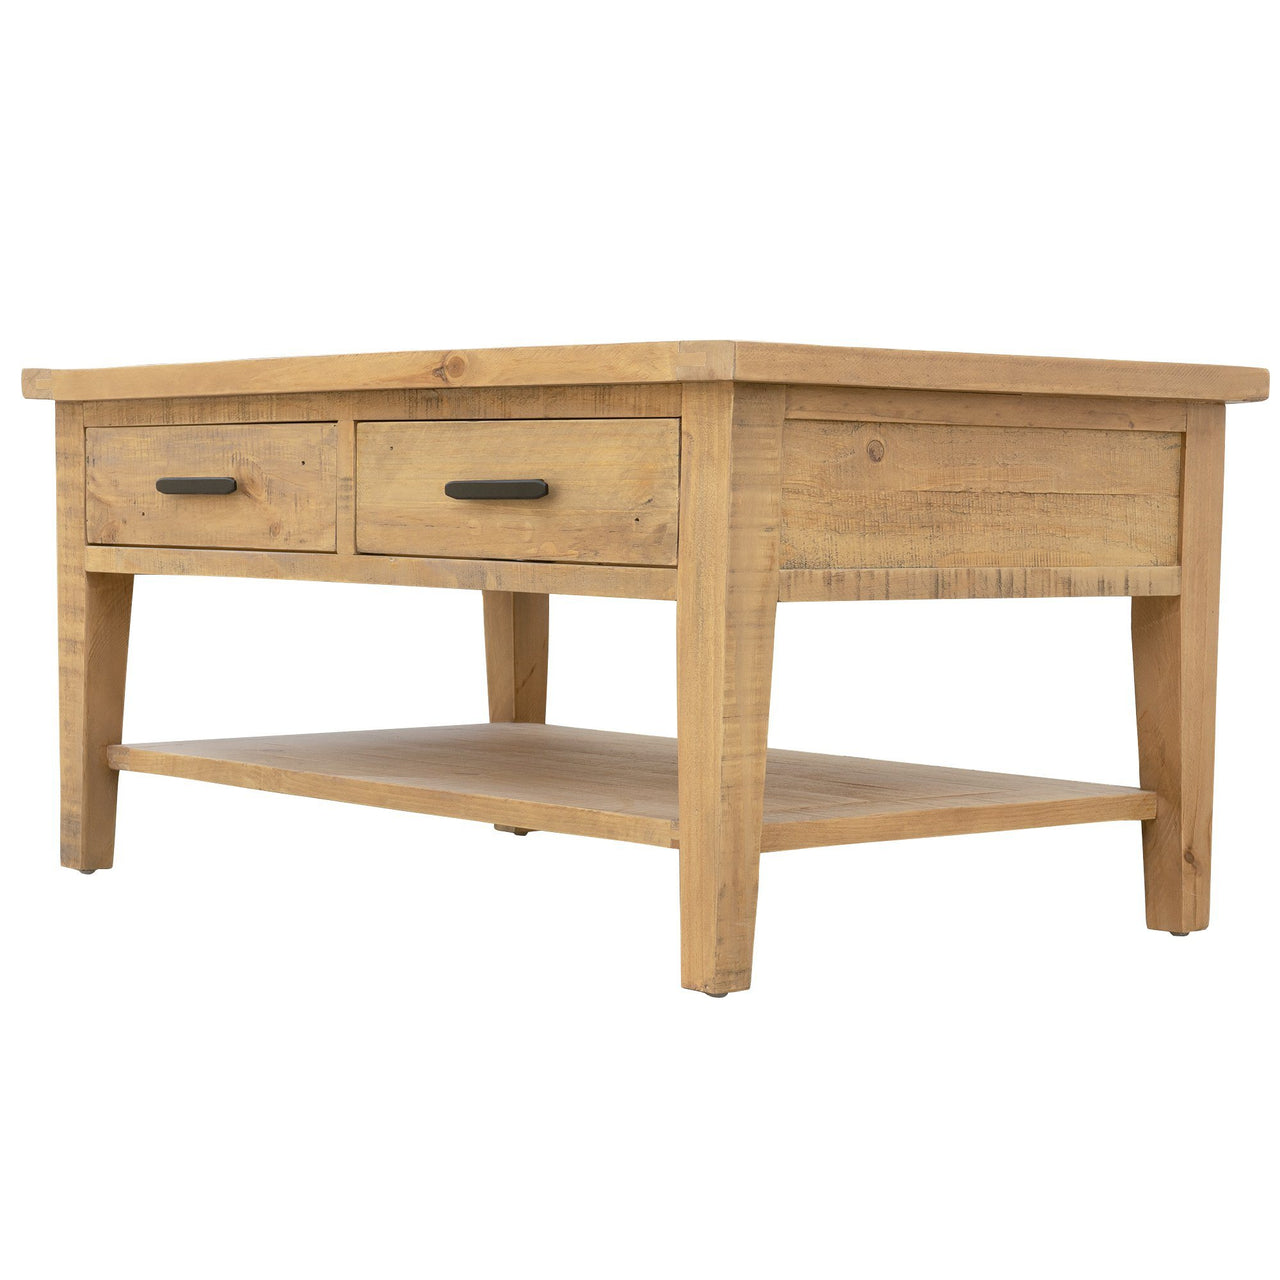 Ashford 40" Reclaimed Wood Coffee Table with Storage Shelf and Two Drawers Coffee Table AndMakers 